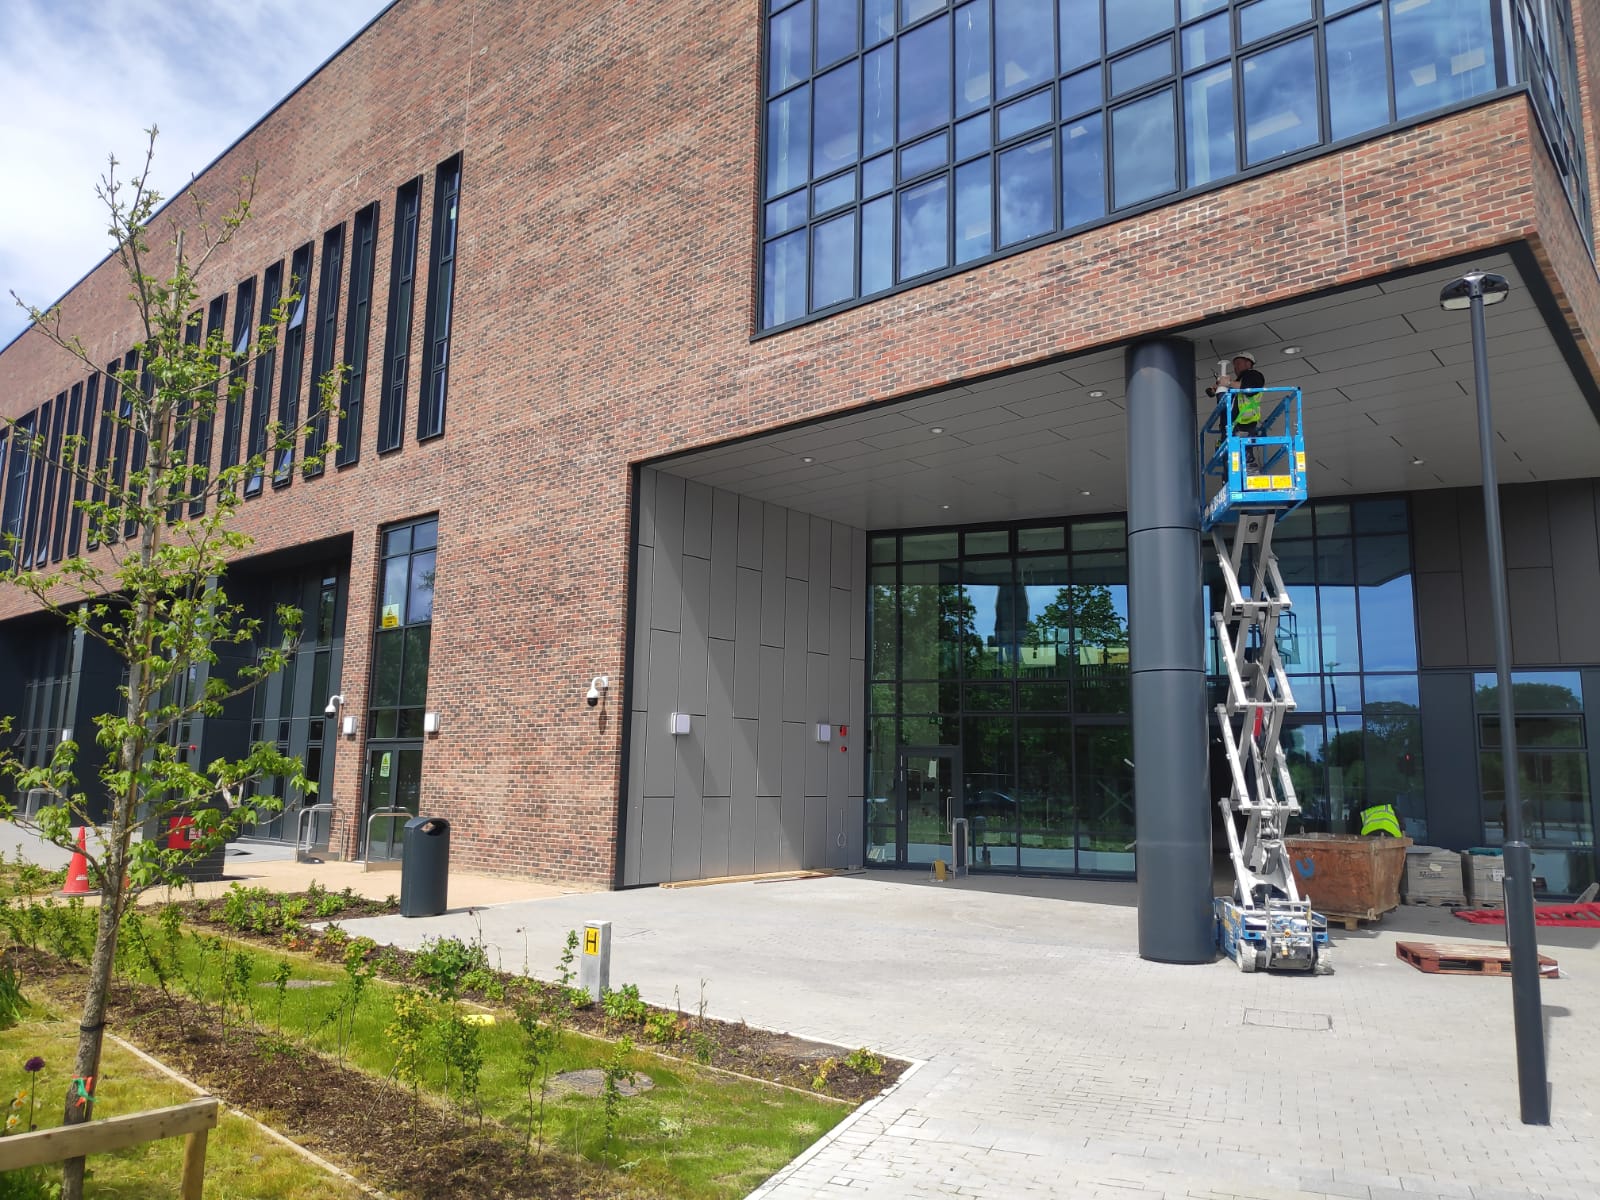 Access Control, CCTV and Intruder in the New NUIM Building